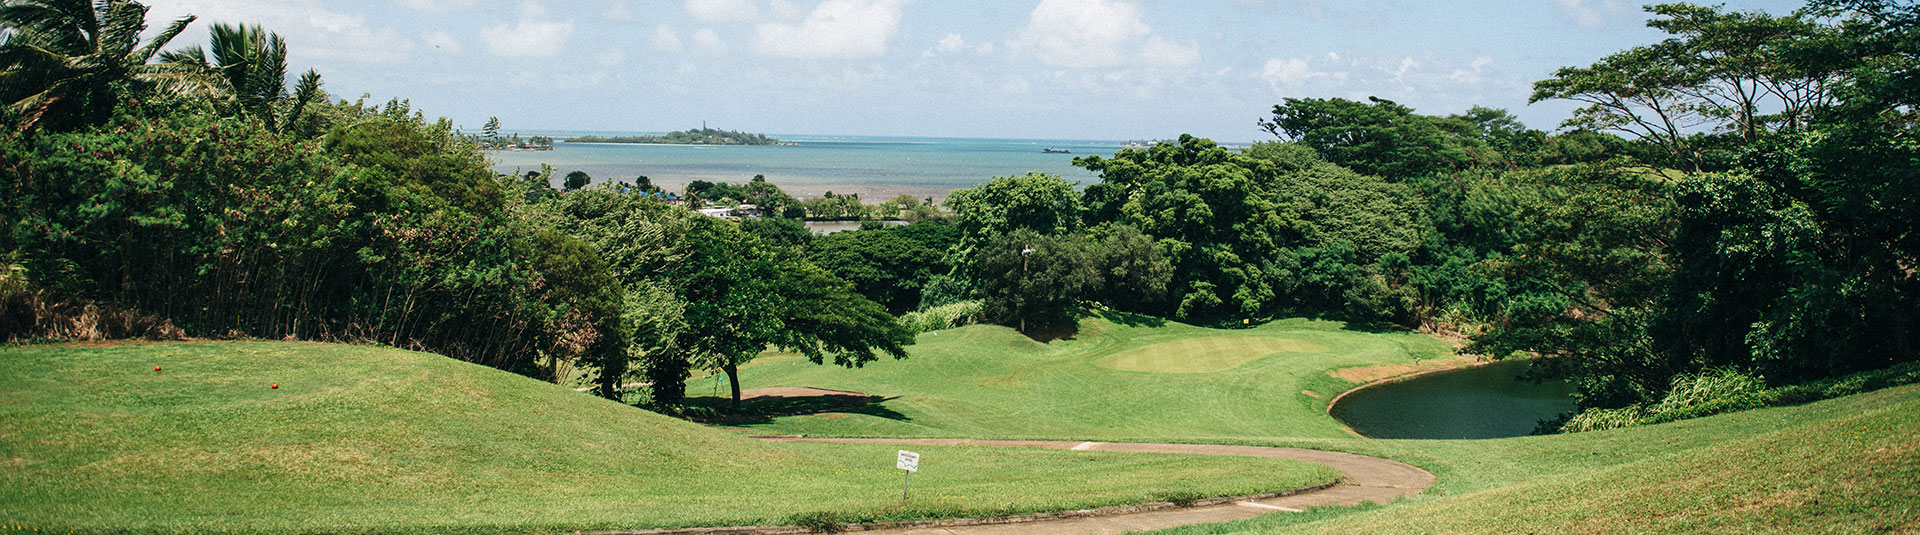 view of ocean from the golf course